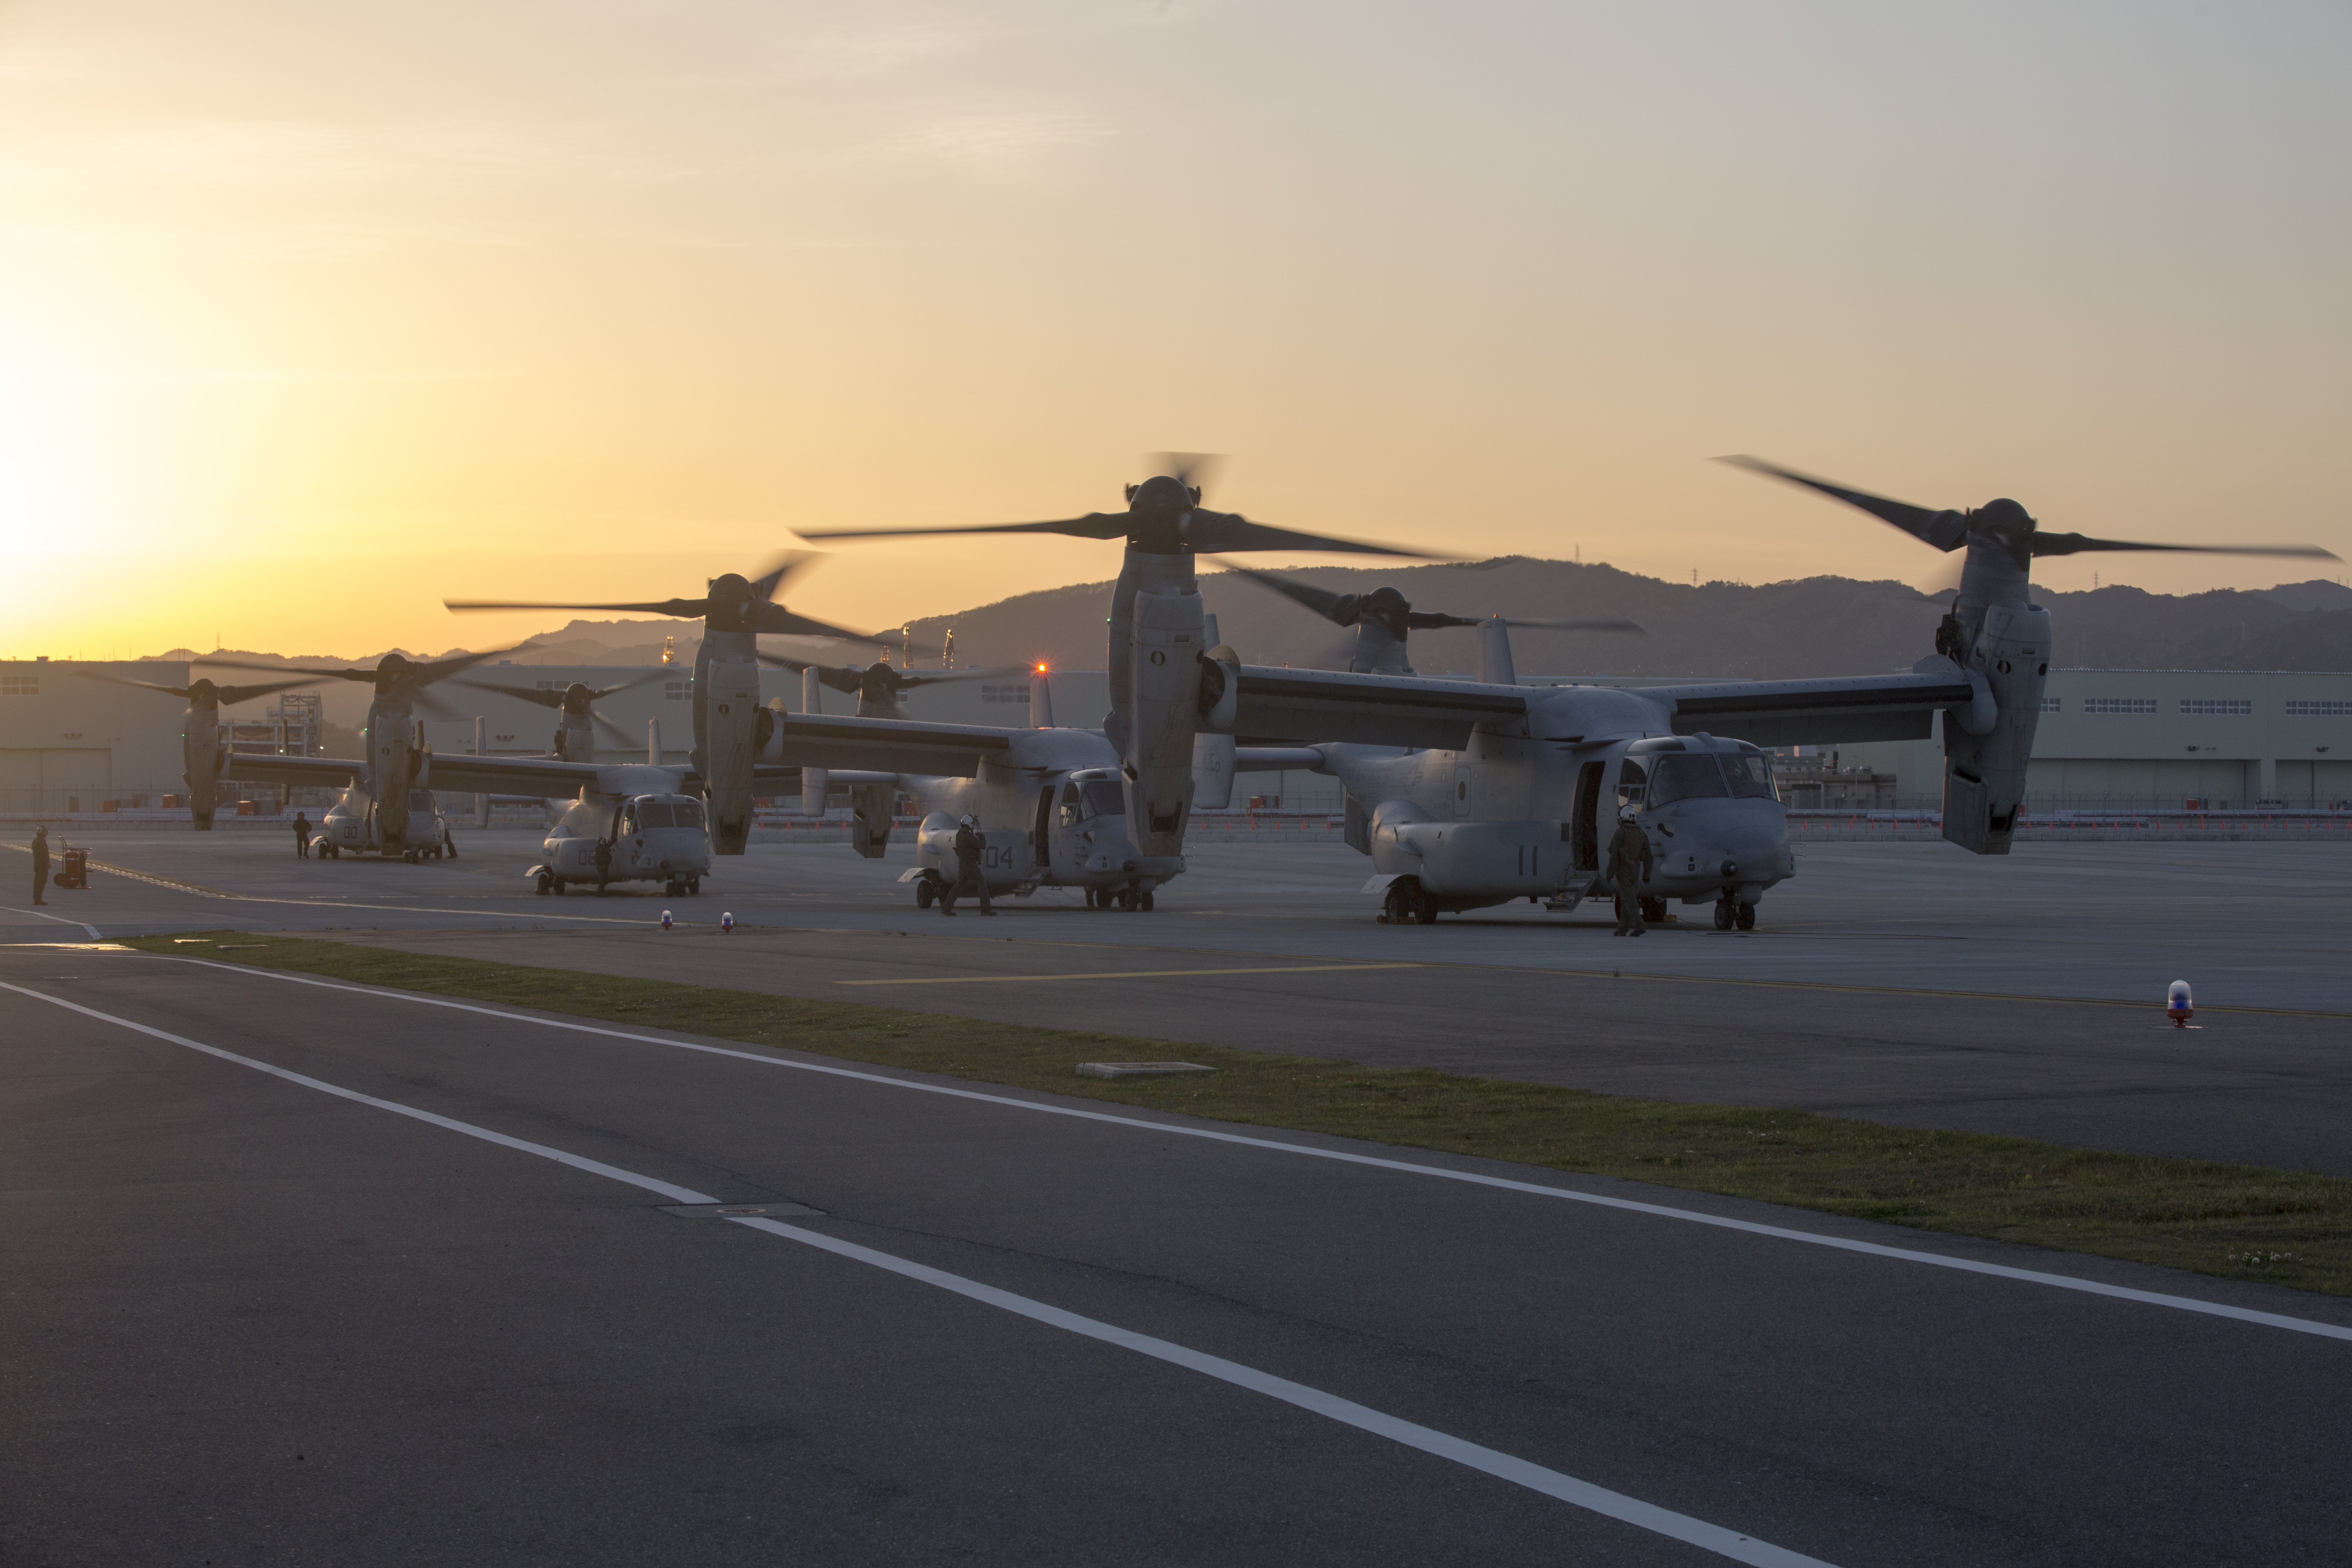 Four MV-22B Osprey aircraft from Marine Medium Tilitrotor Squadron (VMM) 265 attached to the 31st Marine Expeditionary Unit arrive at Marine Corps Air Station Iwakuni, Japan, in support of the Government of Japan’s relief efforts following an earthquake near Kumamoto. US Navy photo.